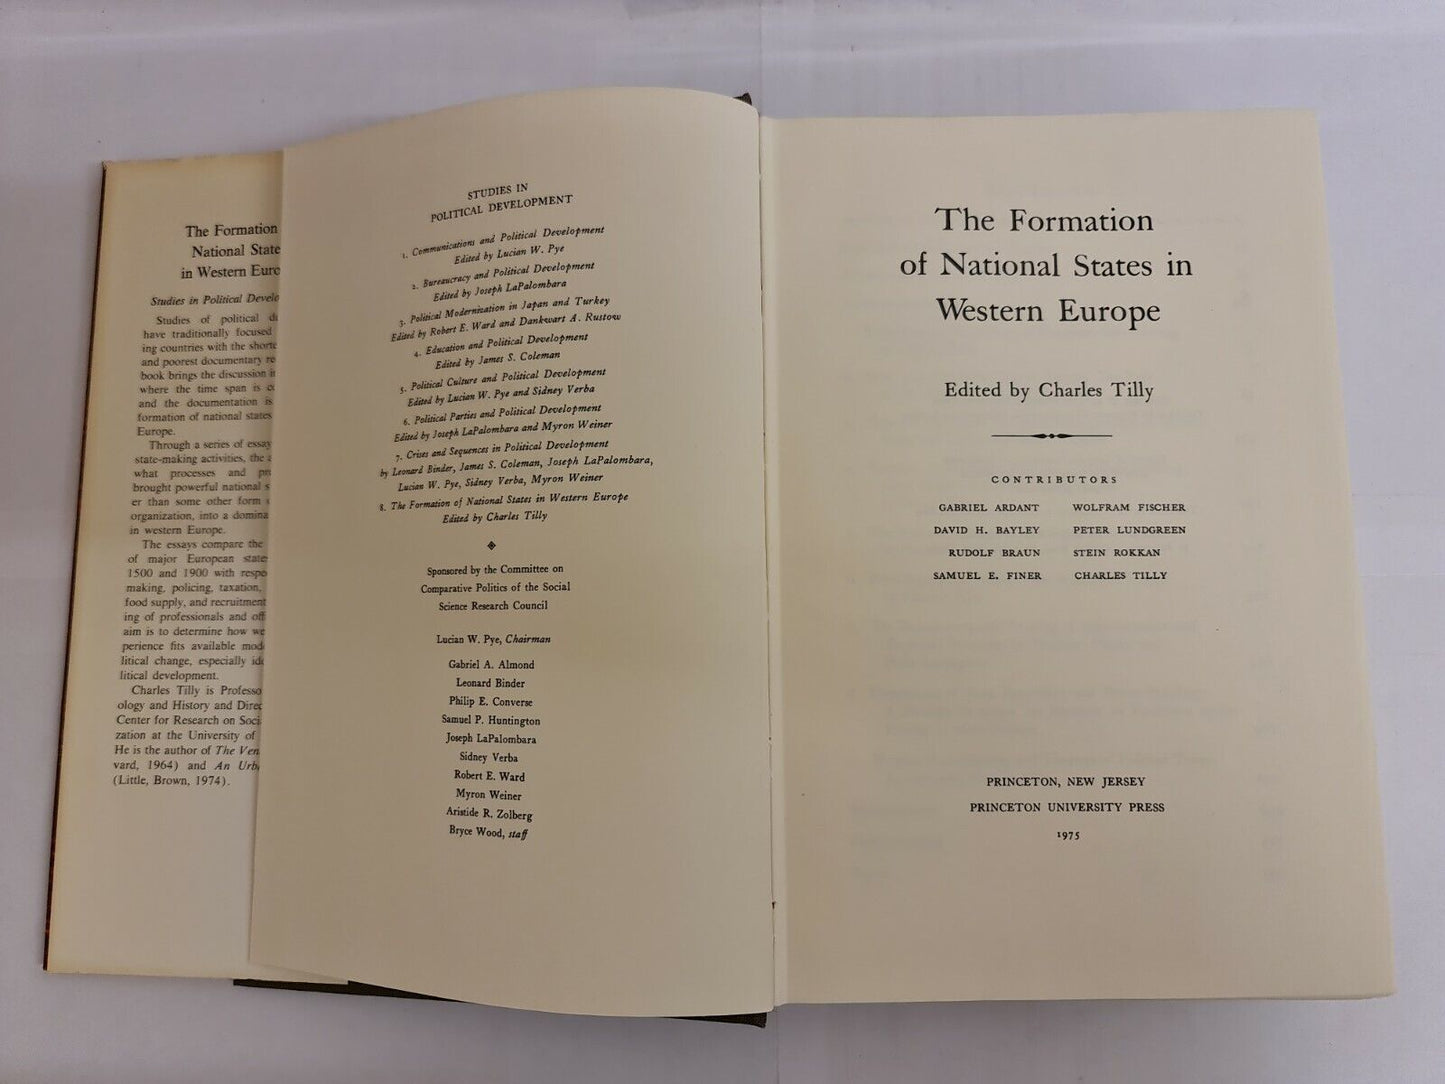 The Formation of National States in Western Europe by Charles Tilly (1975)